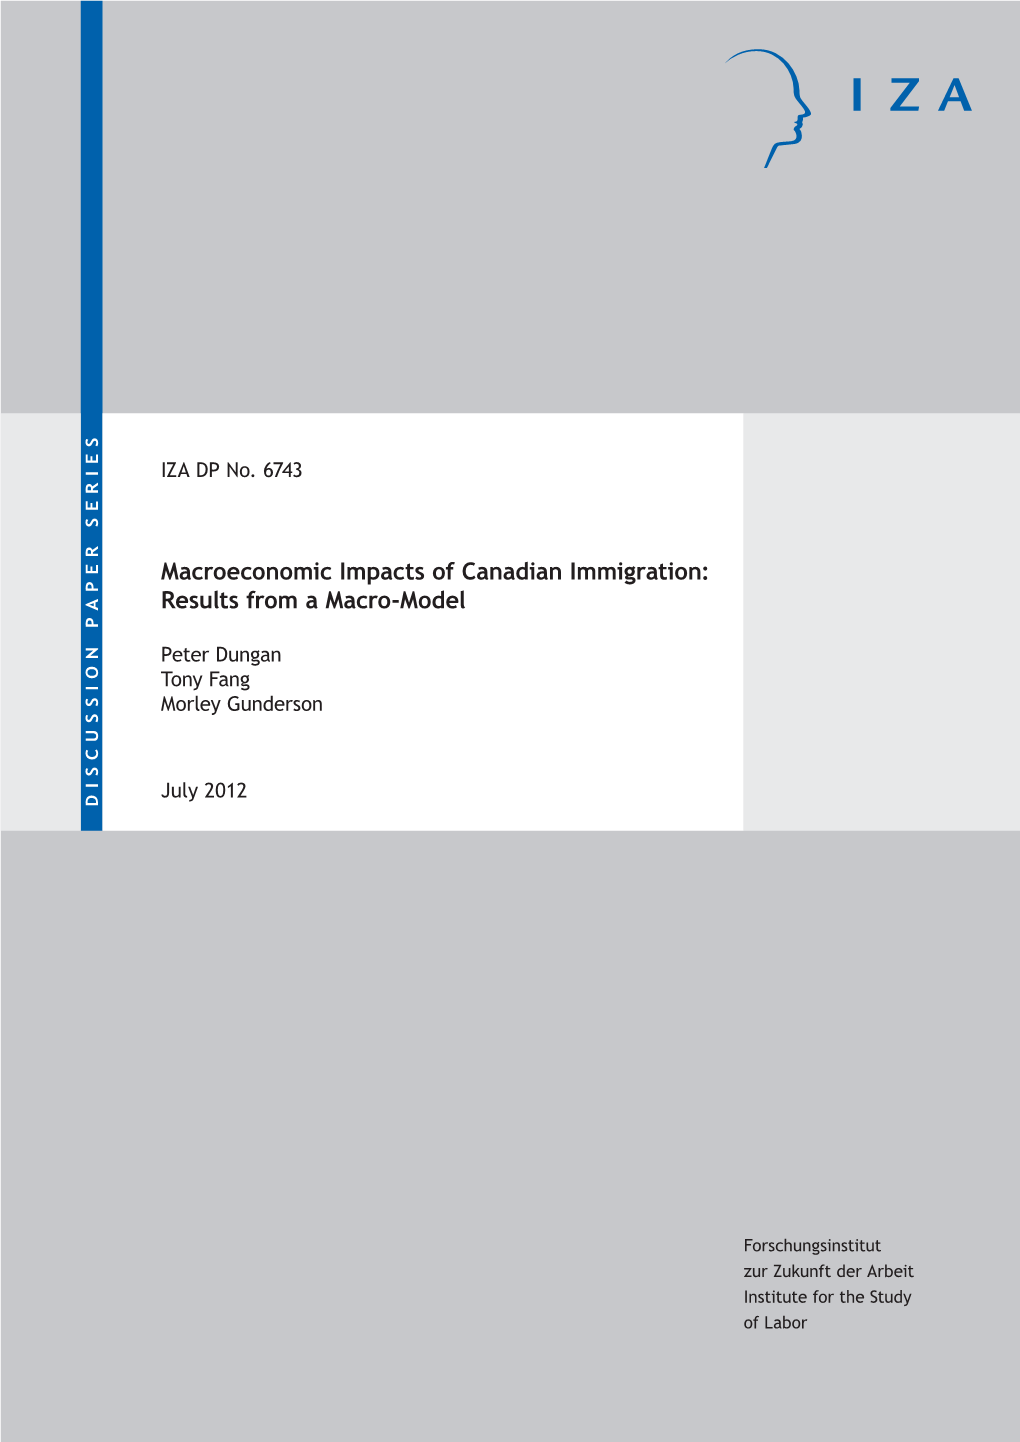 Macroeconomic Impacts of Canadian Immigration: Results from a Macro-Model